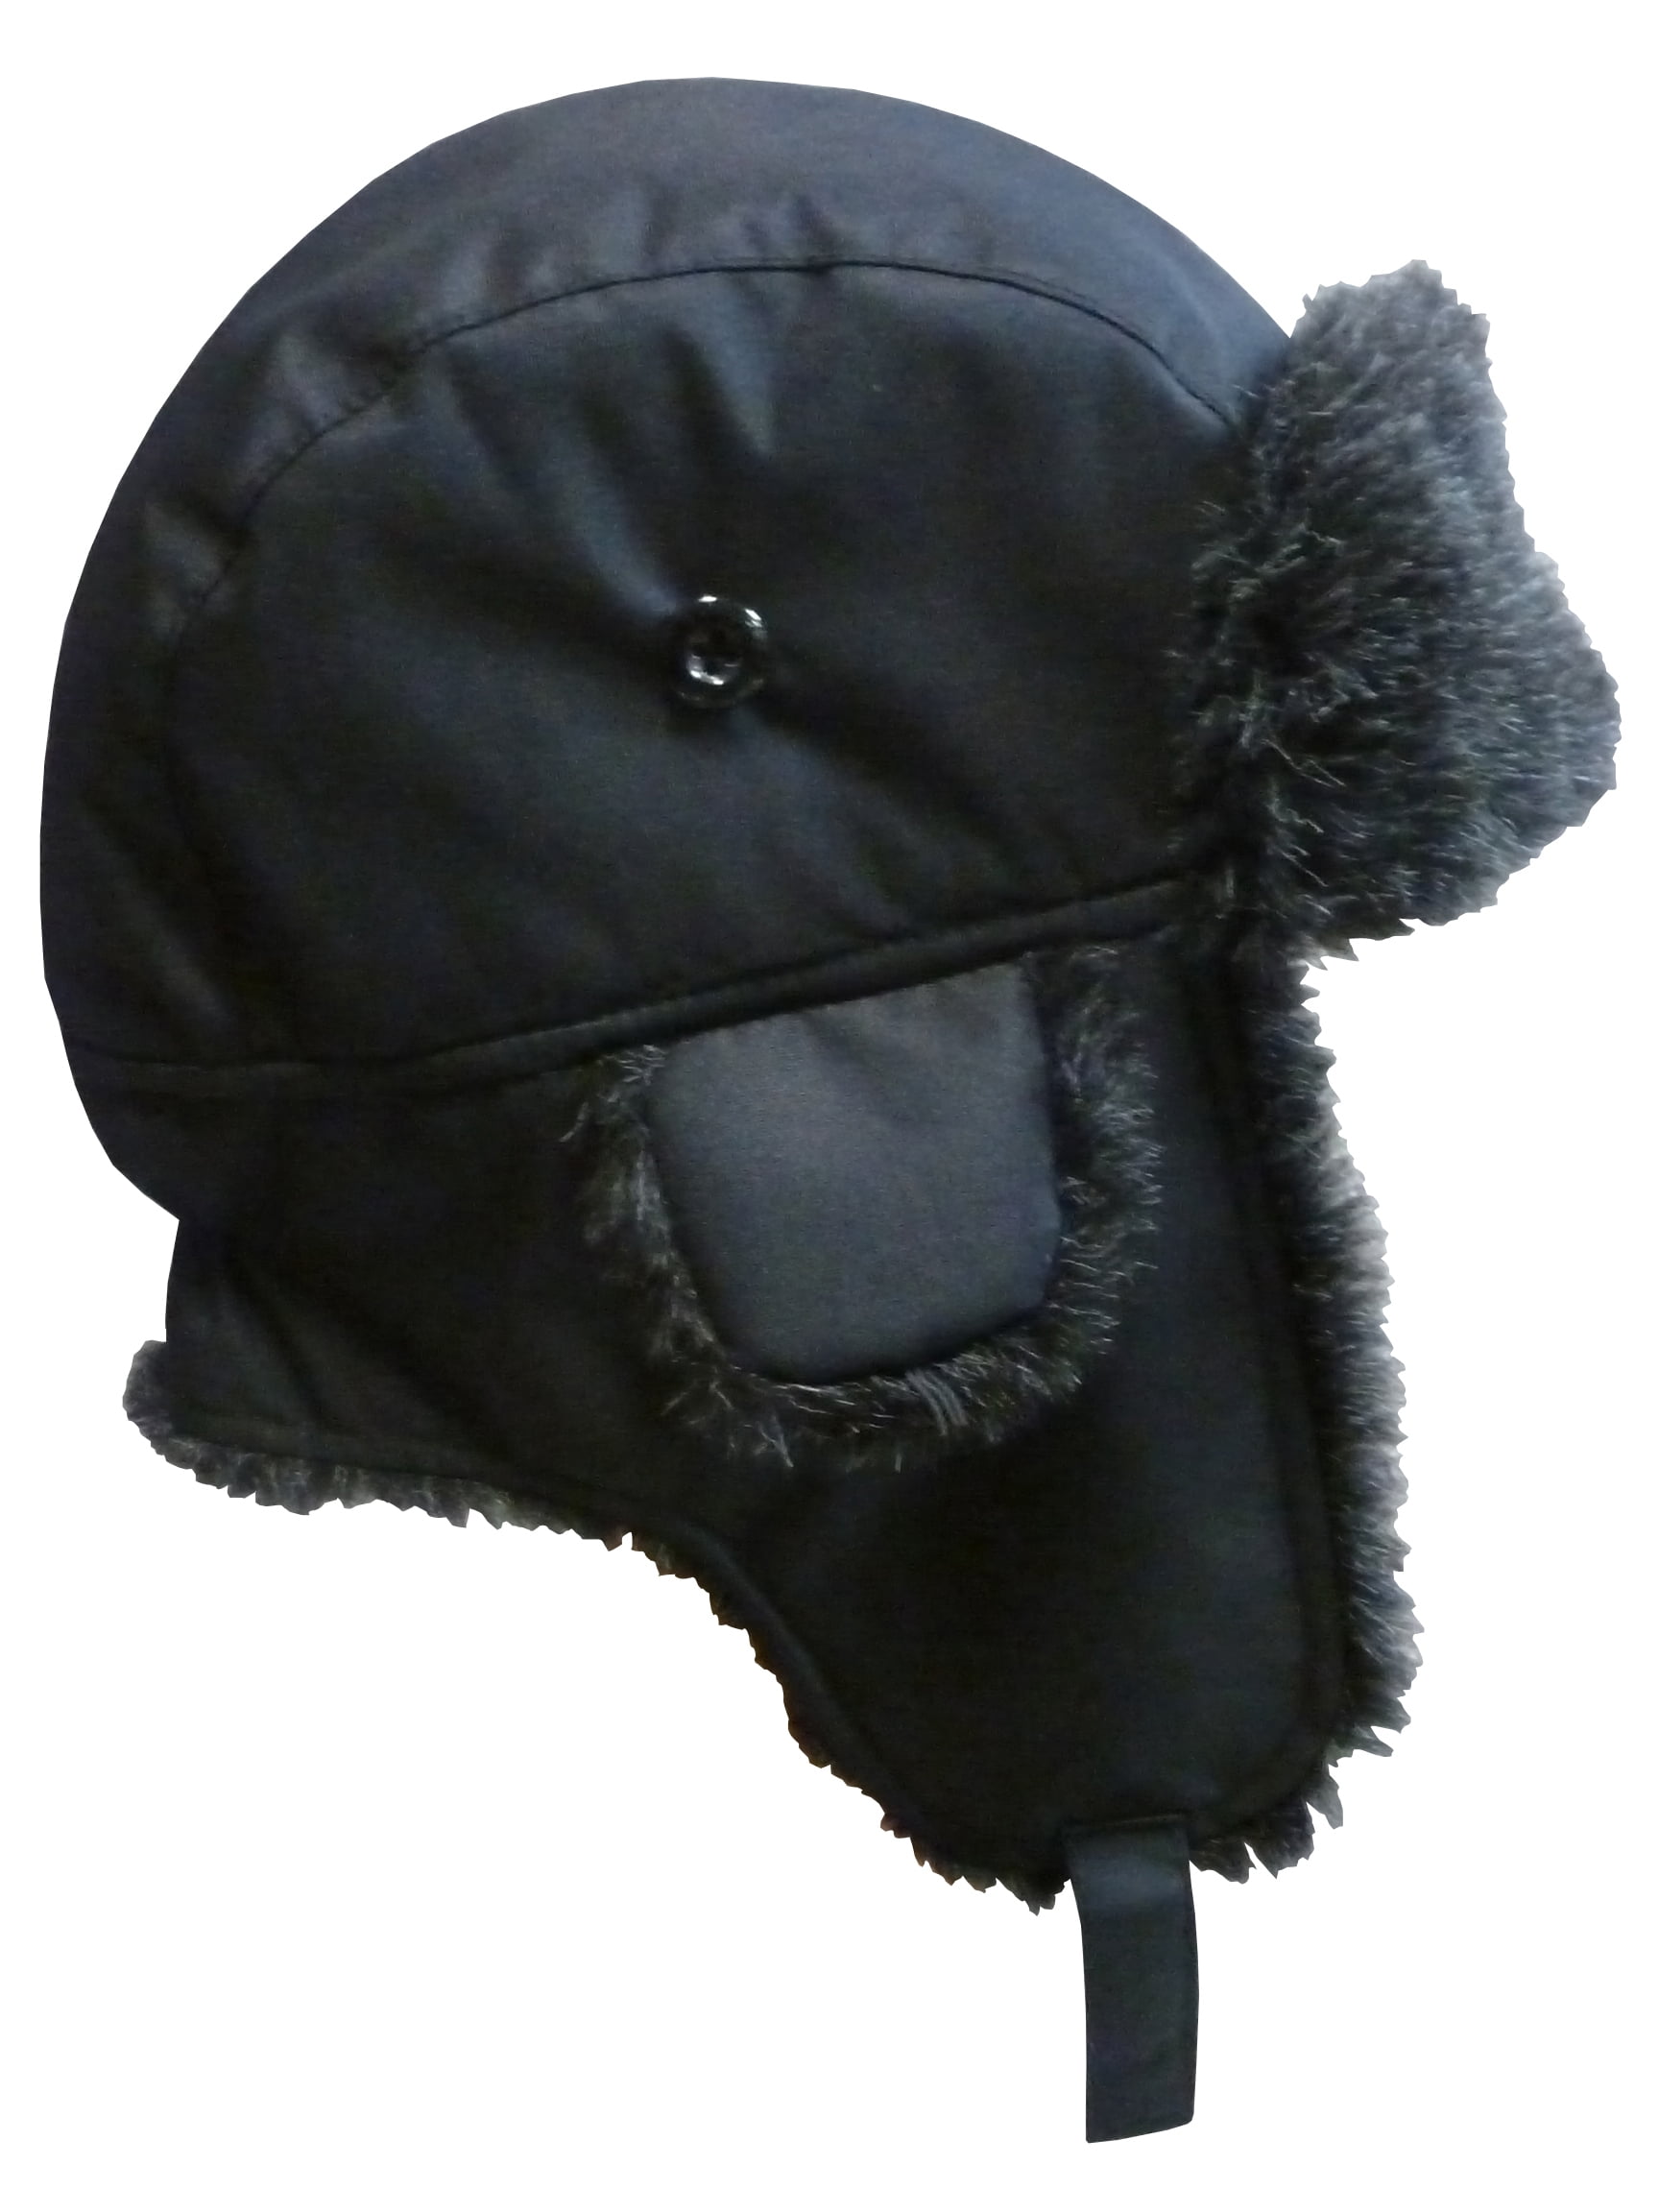 N'Ice Caps - NICE CAPS Big And Little Boys Taslon Trapper Winter Snow Ski  Headwear Hat with Big Ear Flaps - Fits Toddler Kids Children Youth Size  Apparel Accessories - Walmart.com -